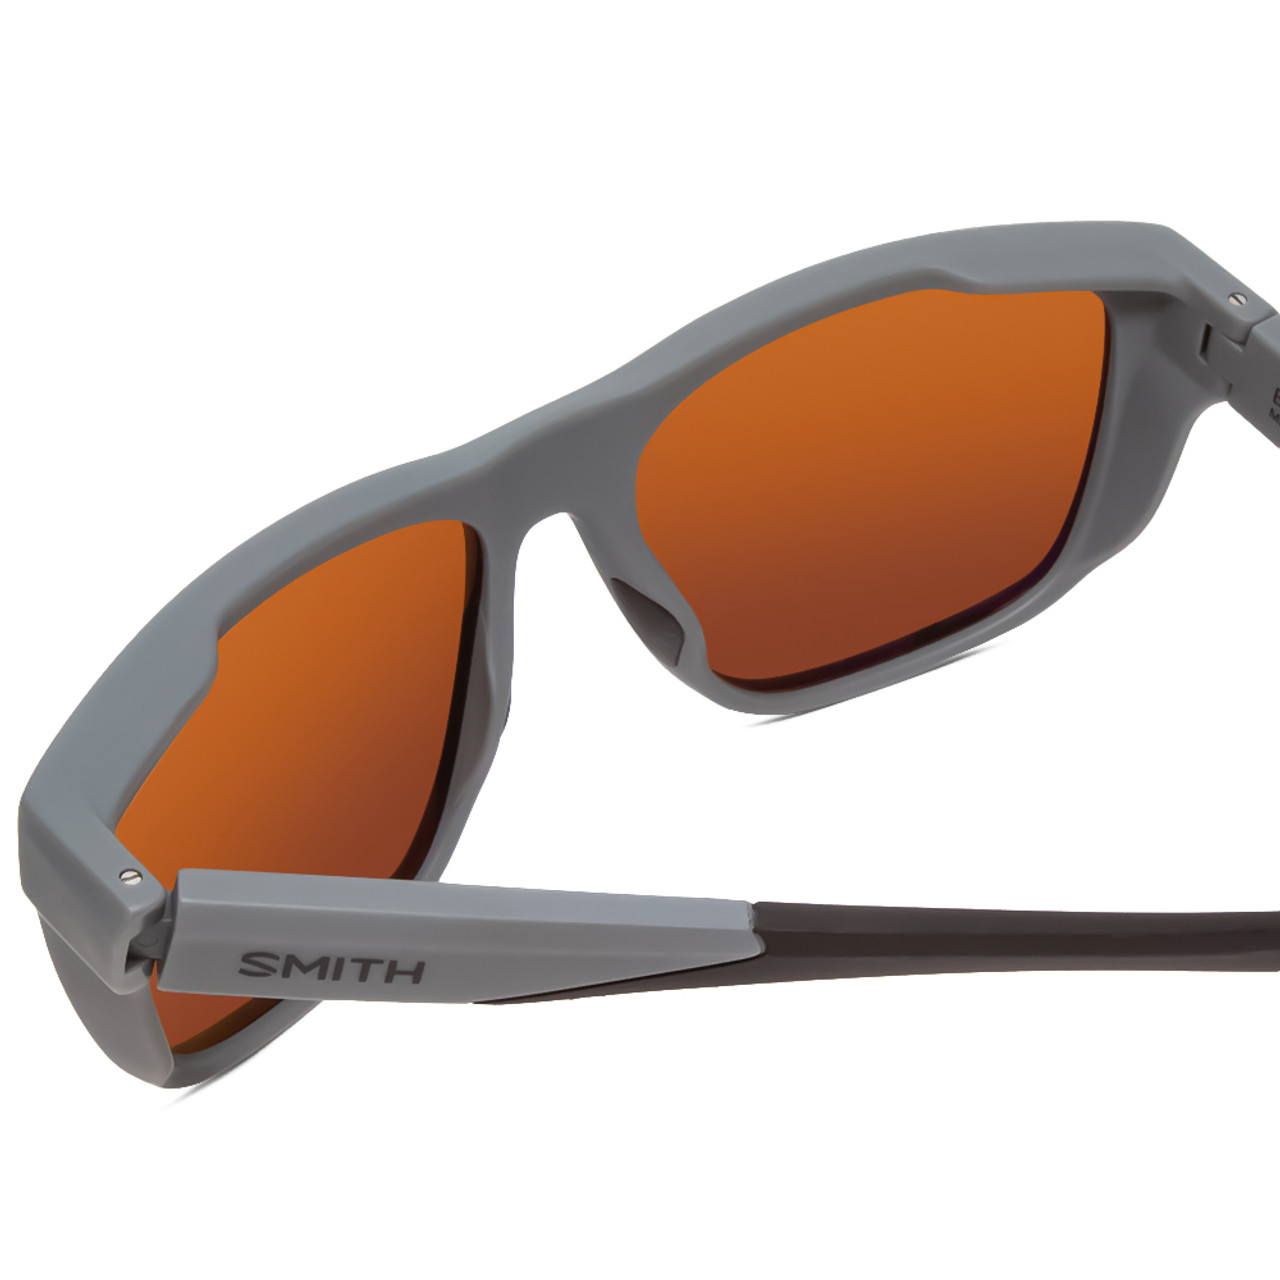 Close Up View of Smith Barra Classic Sunglasses Cement Grey/ChromaPop Polarized Green Mirror 59mm